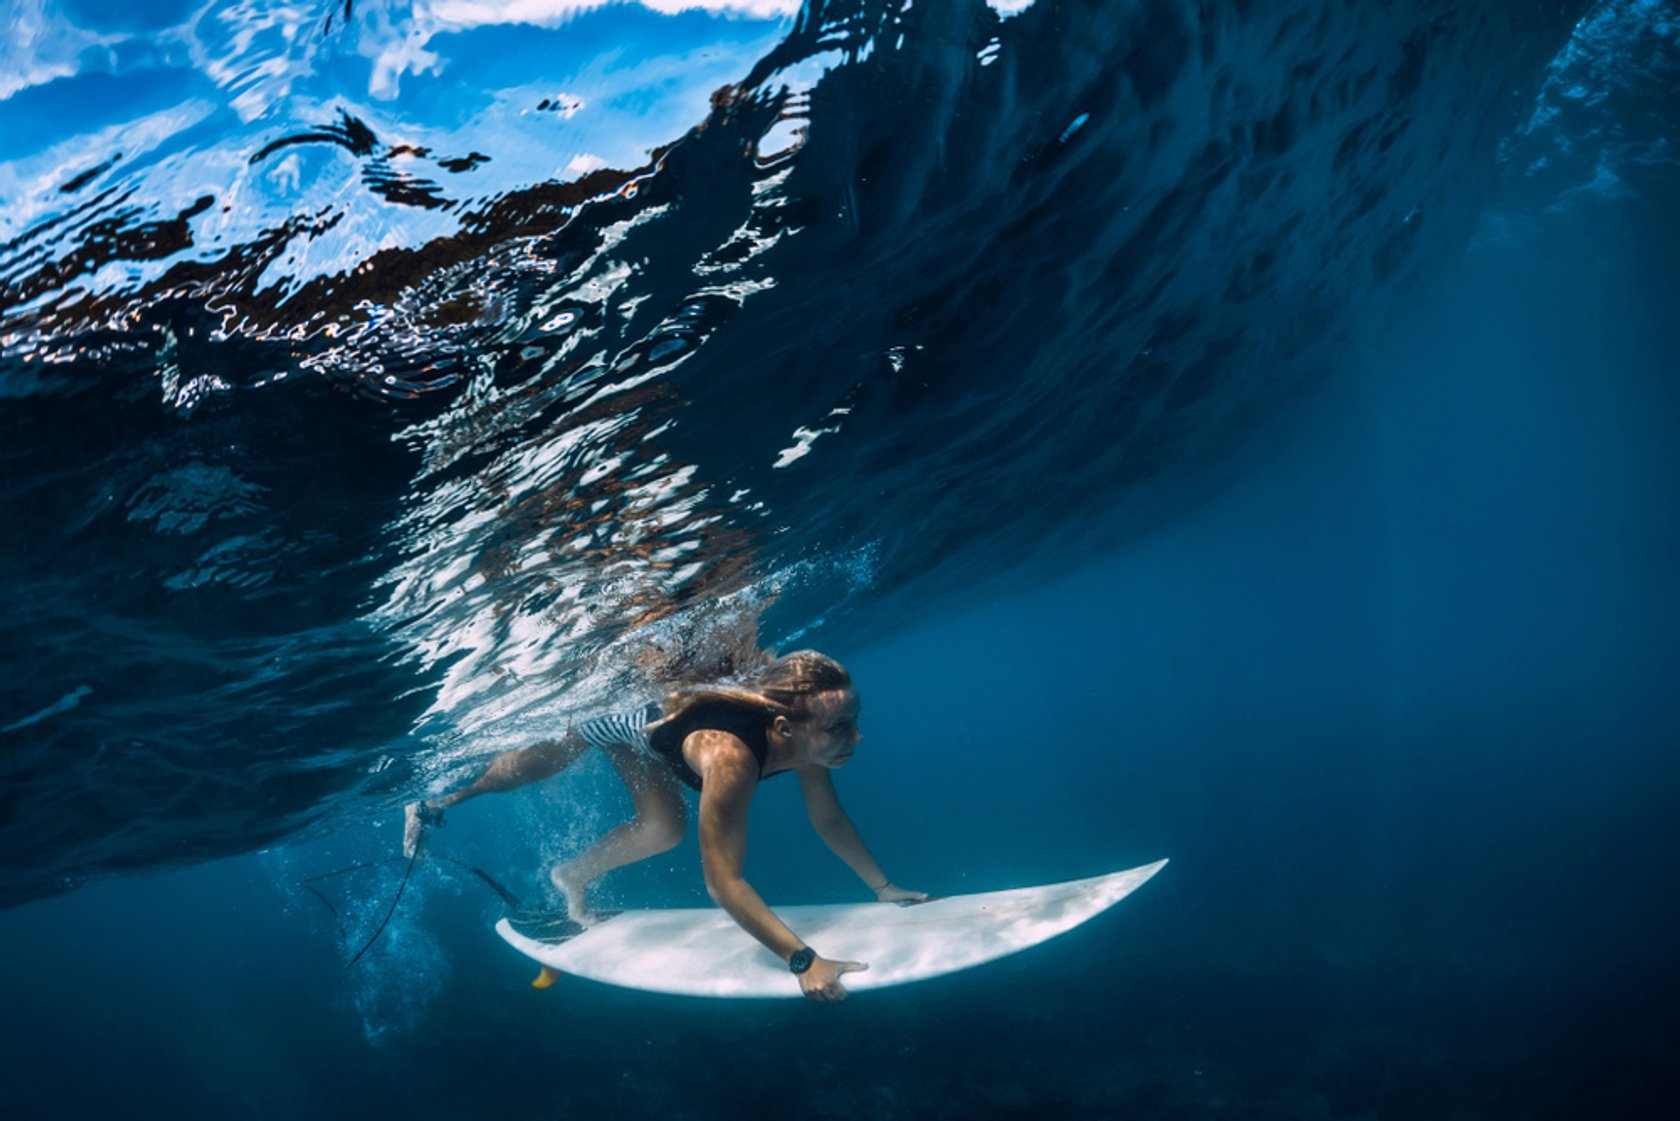 The best camera yet for shooting surf